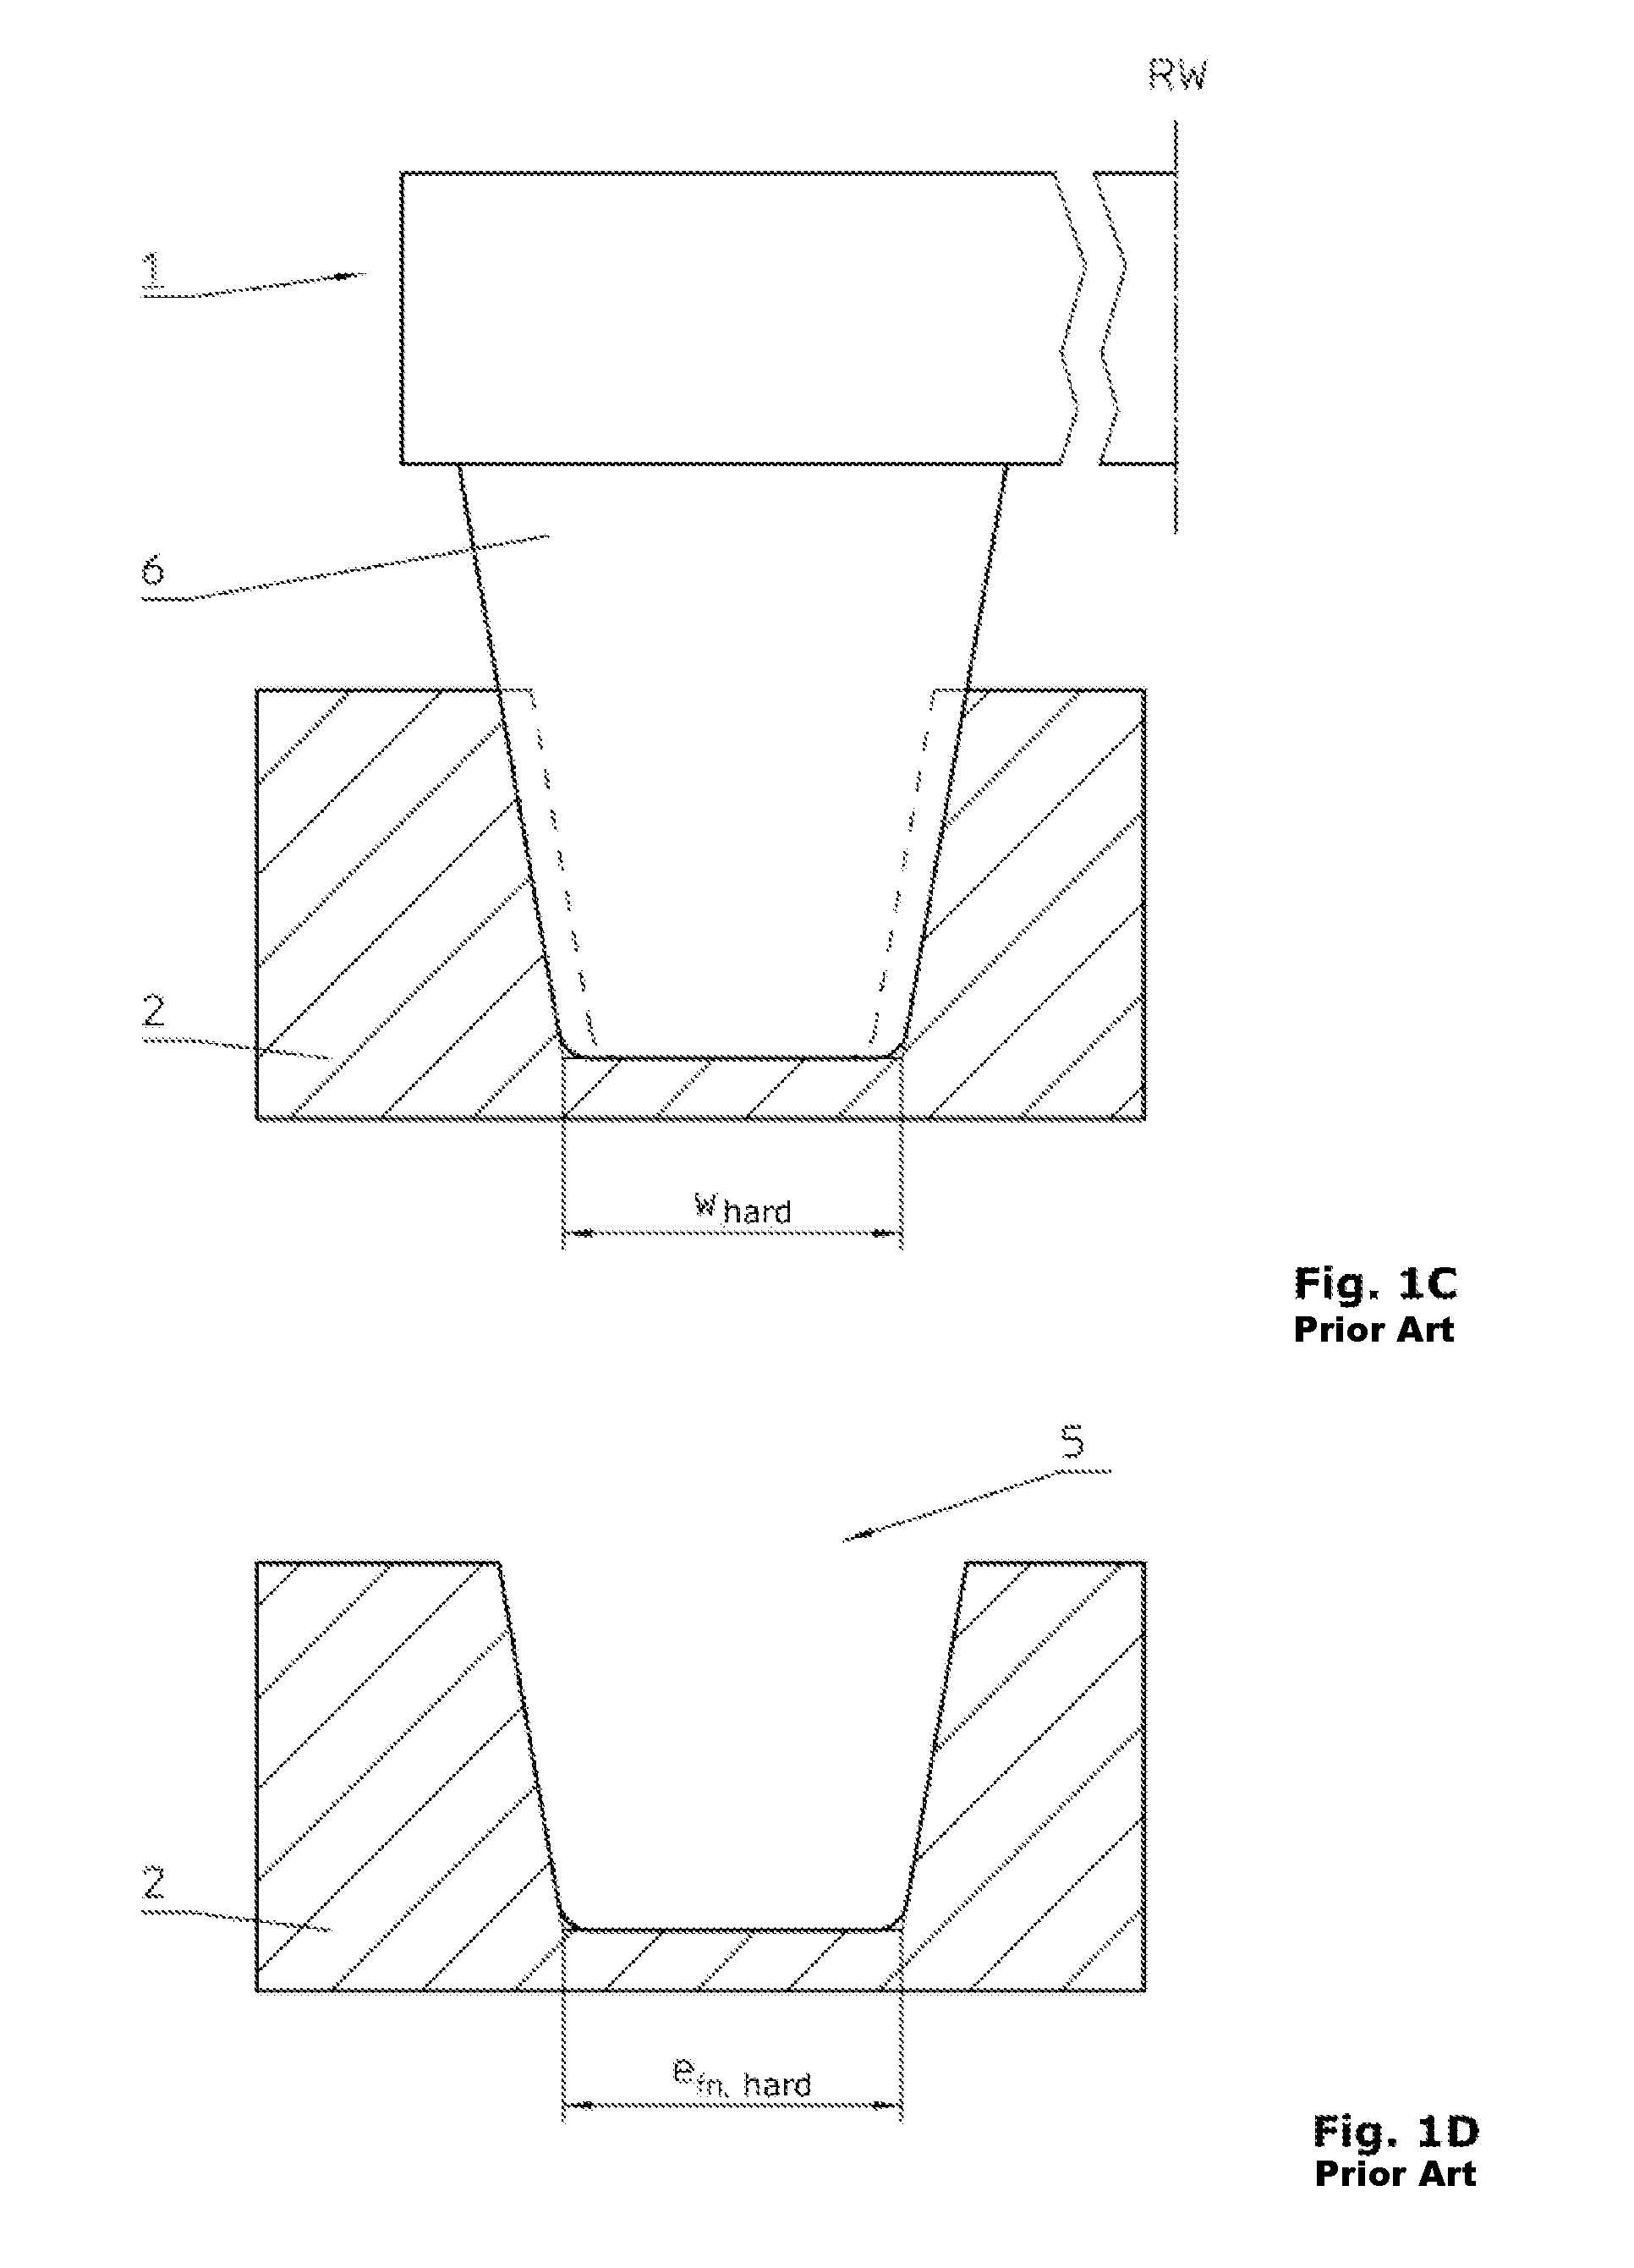 Method for Gear Pre-Cutting of a Plurality of Different Bevel Gears and Use of an According Milling Tool